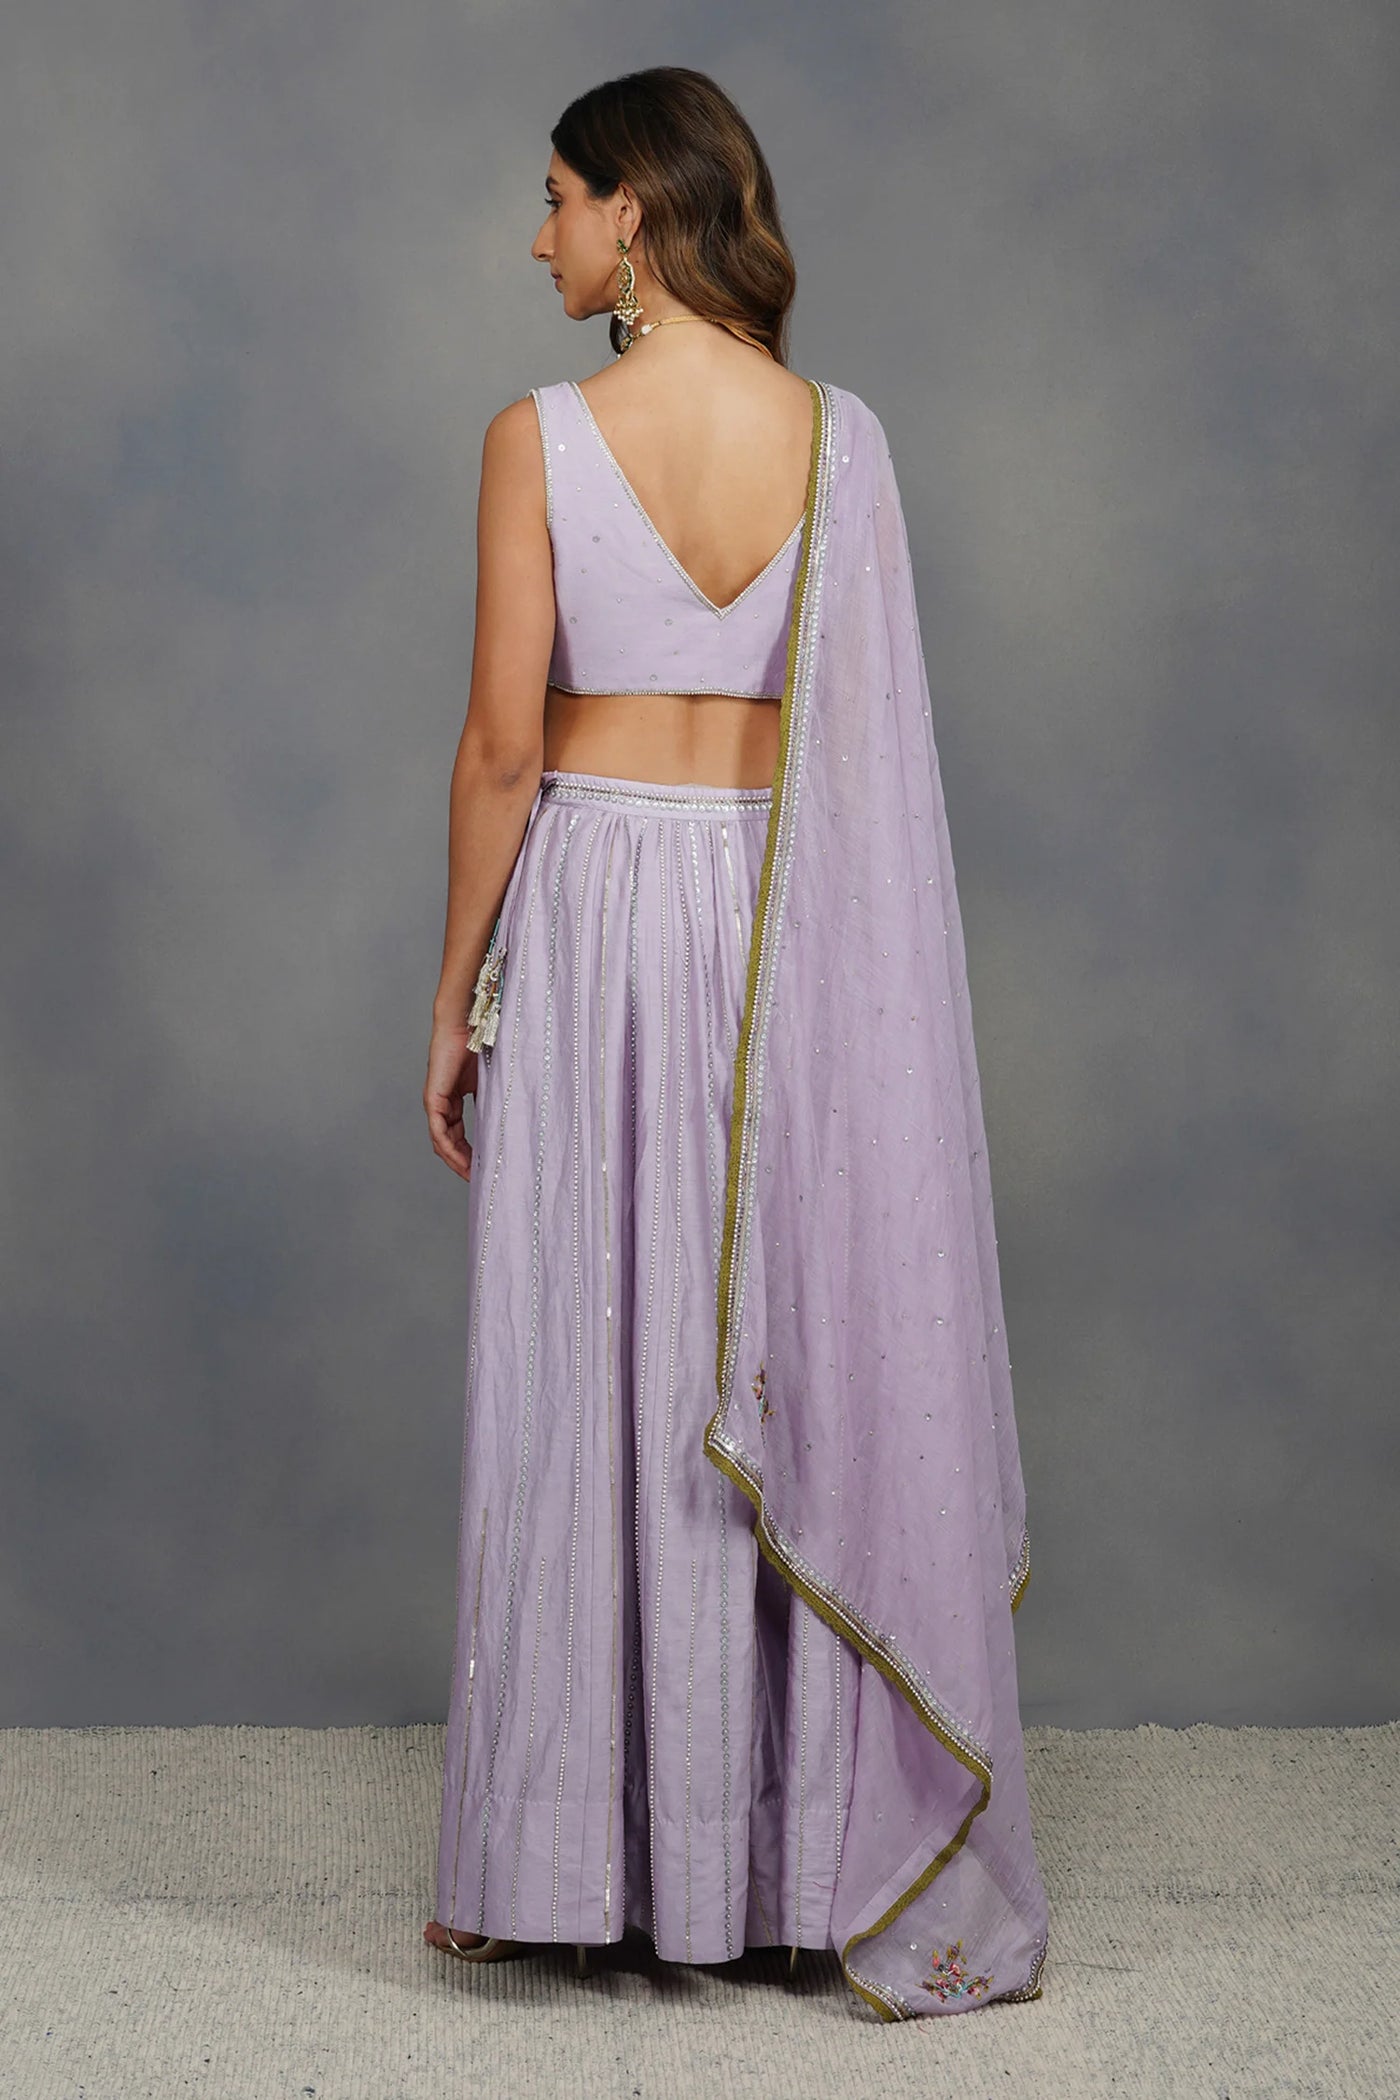 Purple Chanderi Sharara Set - Indian Clothing in Denver, CO, Aurora, CO, Boulder, CO, Fort Collins, CO, Colorado Springs, CO, Parker, CO, Highlands Ranch, CO, Cherry Creek, CO, Centennial, CO, and Longmont, CO. Nationwide shipping USA - India Fashion X